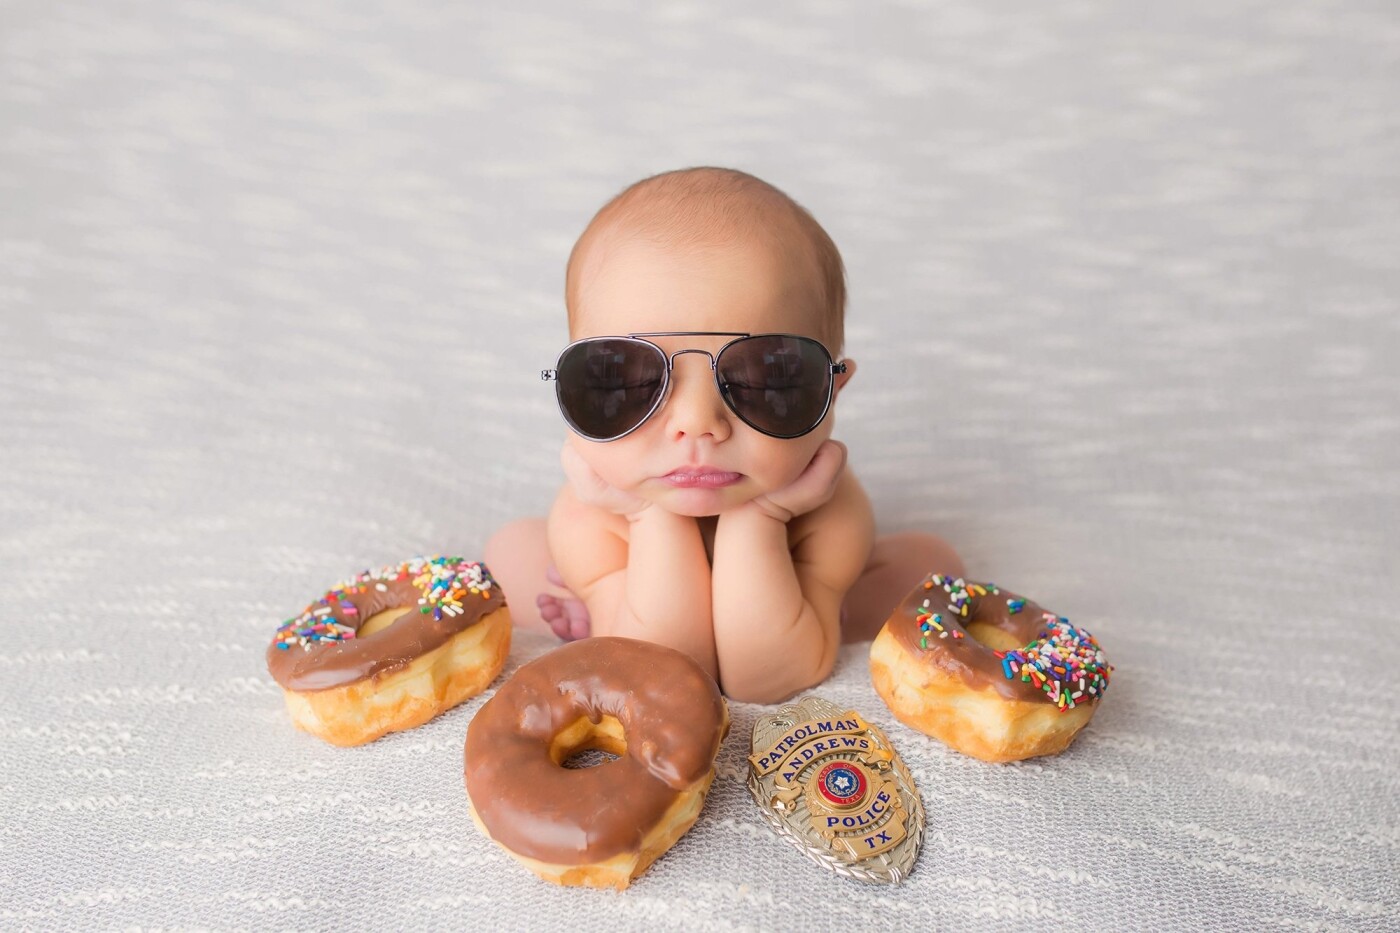 Mason's mommy told me prior to her session she would like to include donuts, and some of  her husband's police uniform into his newborn session. Right away I had this image pop into my head! It turned out just like I imagined.